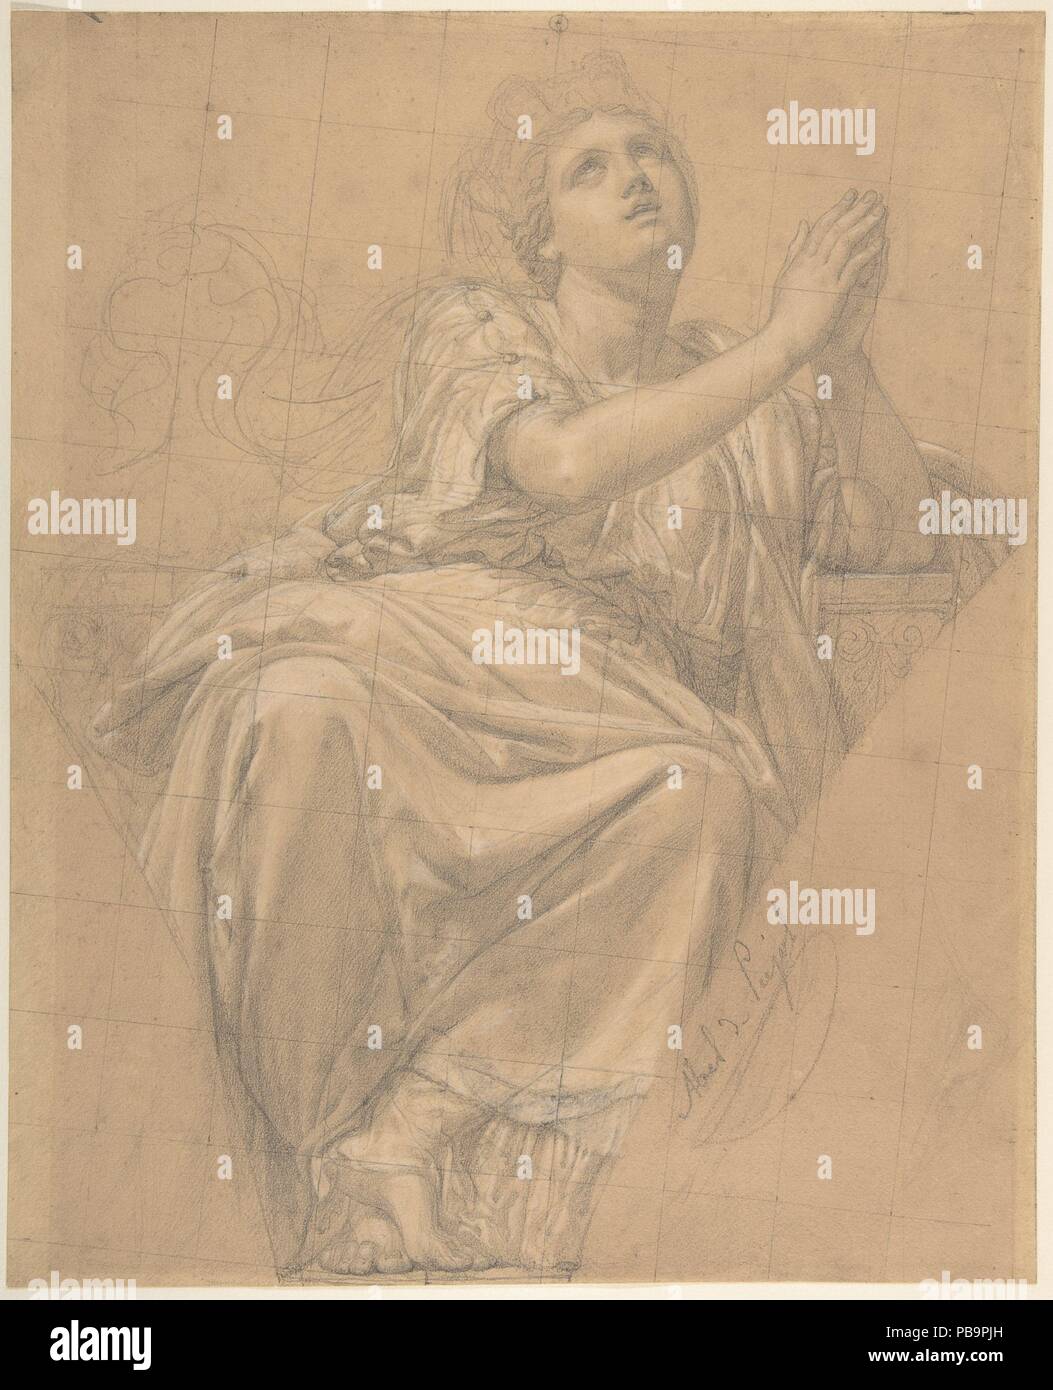 Allegorical Figure of the City of Piacenza, for a Pendentive in the Chapel of Saint-Roch, Church of Saint-Sulpice, Paris (recto); Studies for the Same Figure (verso). Artist: Alexandre Denis Abel de Pujol (French, Valenciennes 1785-1861 Paris). Dimensions: Sheet: 11 13/16 x 9 1/2 in. (30 x 24.2cm). Date: 1821.  The compositional shape of this preparatory drawing reflects the destination of the finished work: a pendentive--the triangular section of vaulting where a dome connects to supporting arches below--in a chapel devoted to Saint Roch in the Church of Saint-Sulpice in Paris. As an allegory Stock Photo